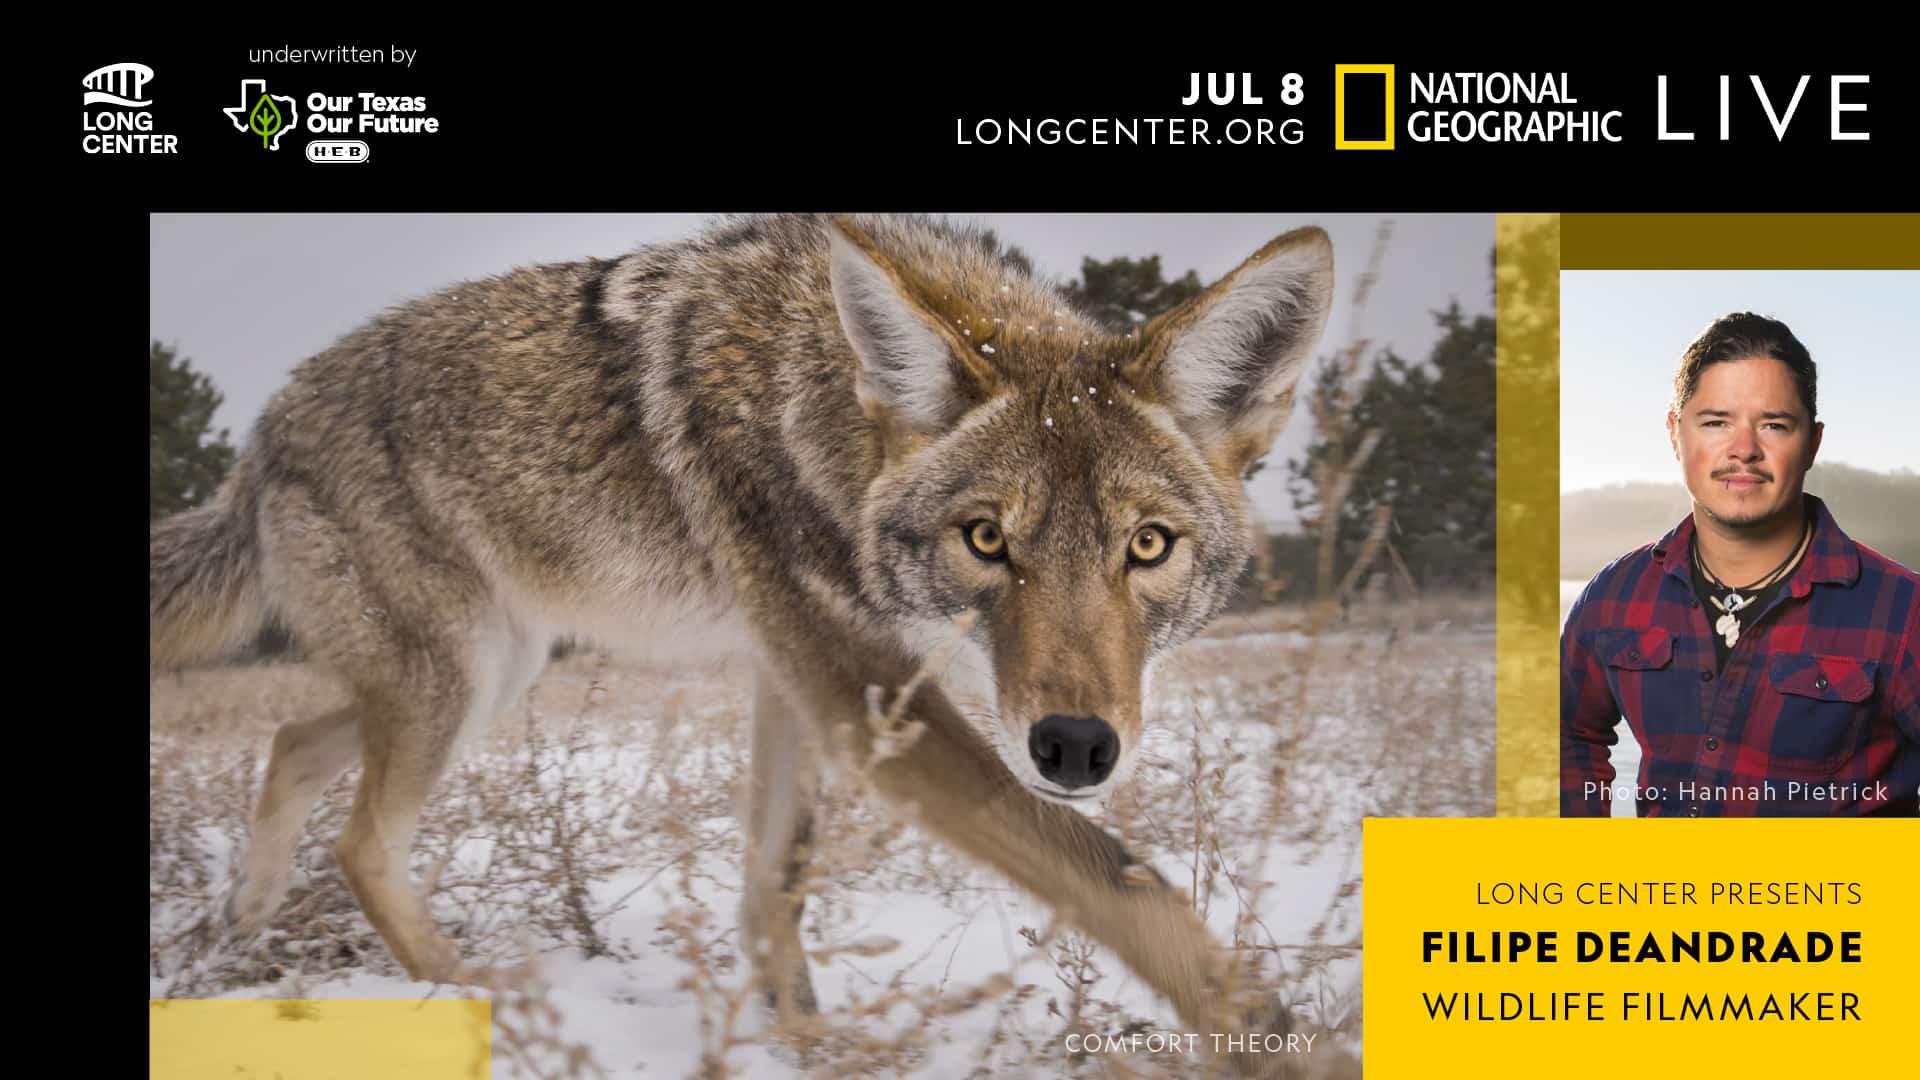 National Geographic Live Speaker Series